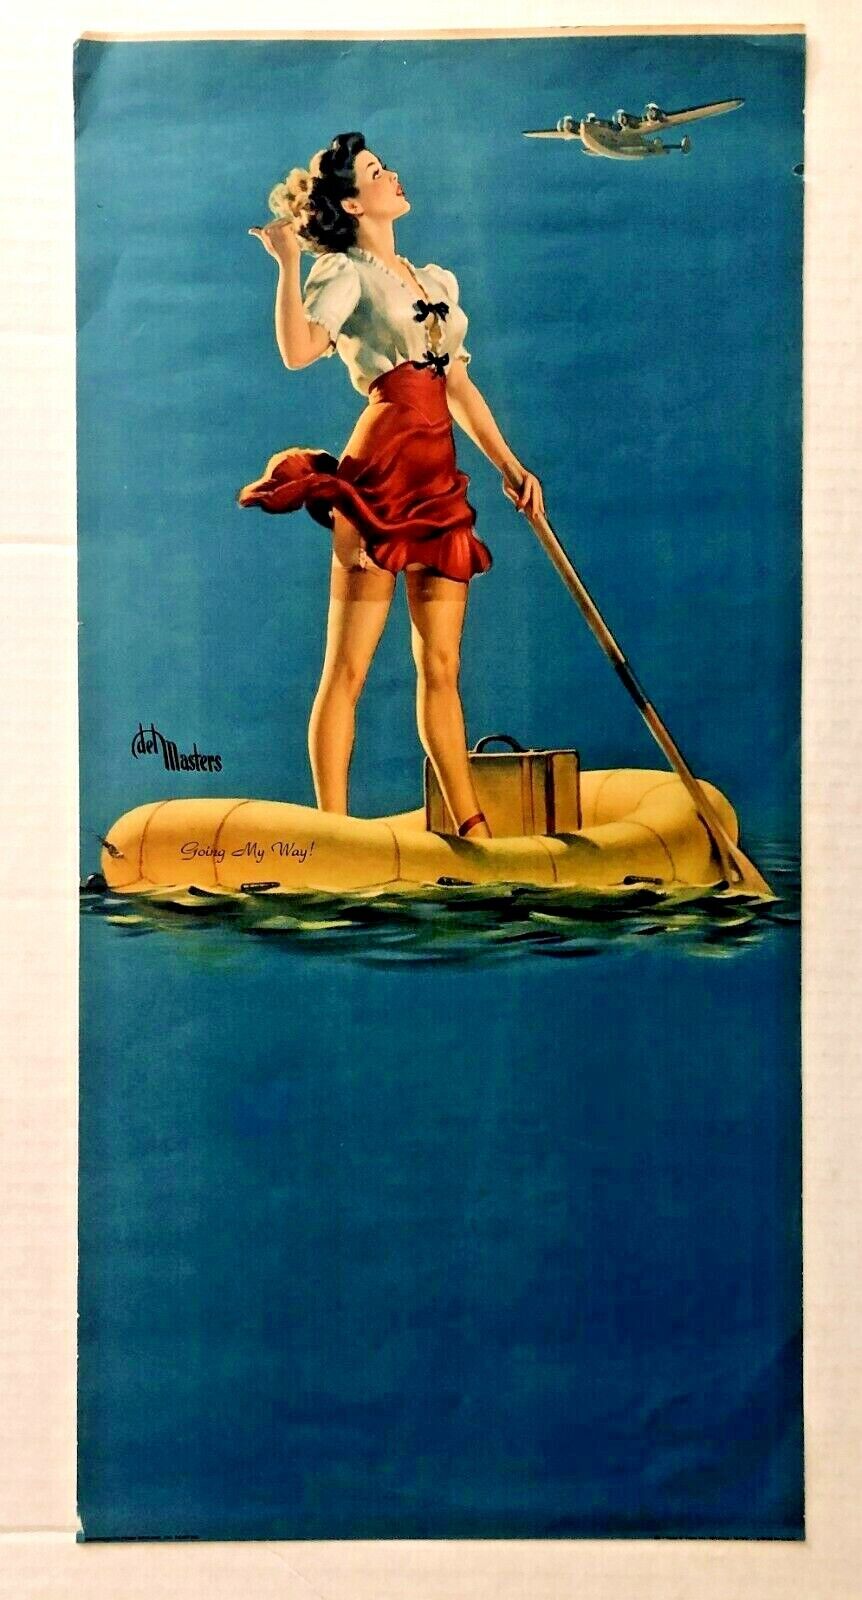 Nice 1940's Pinup Girl Picture by Del Masters - Going My Way - Woman on Raft